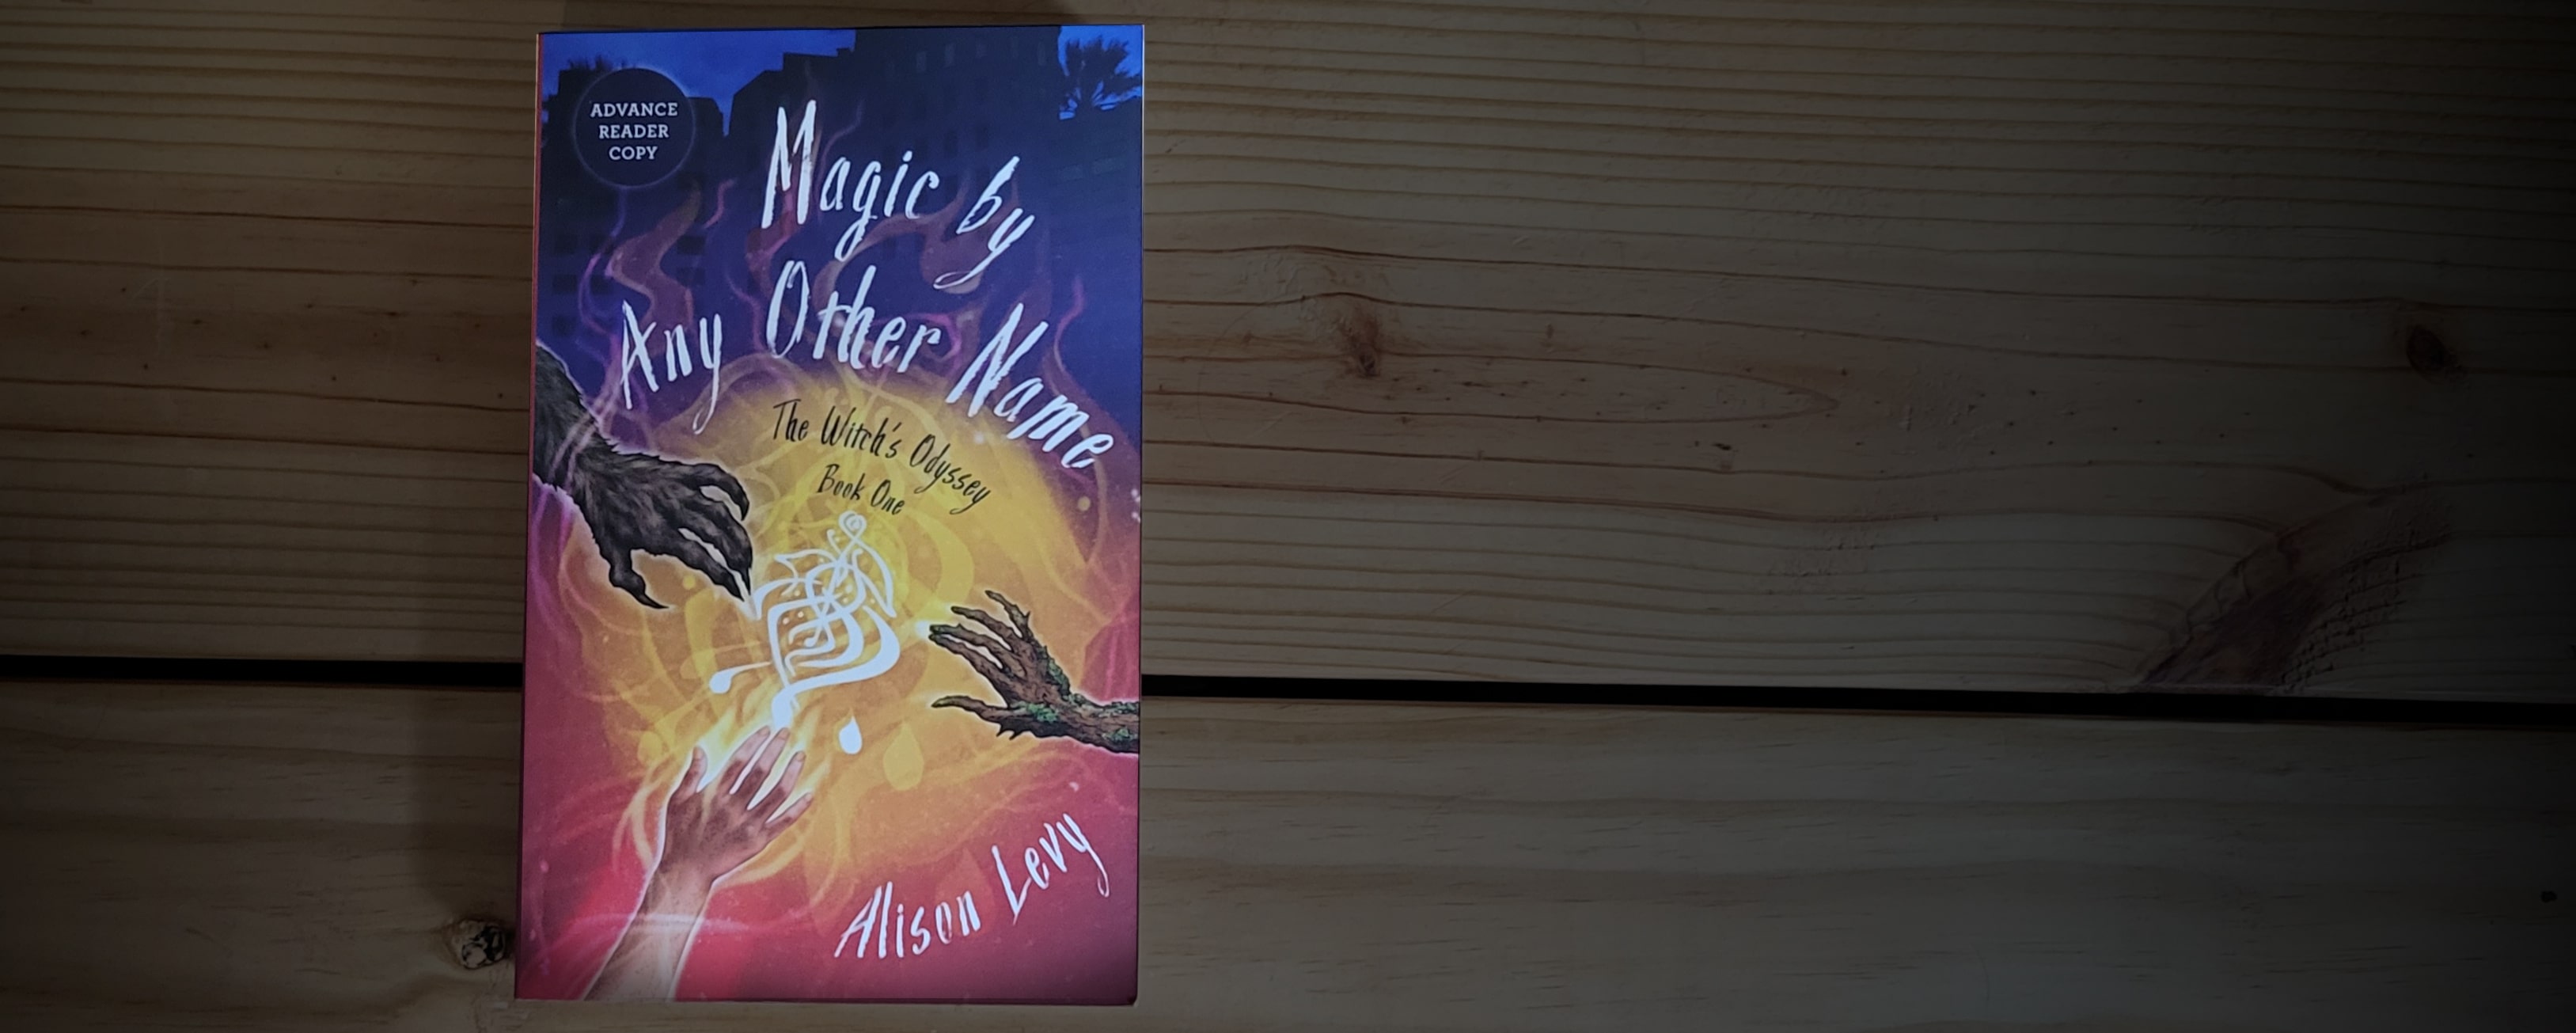 Book cover of Magic by Any Other Name by Alison Levy